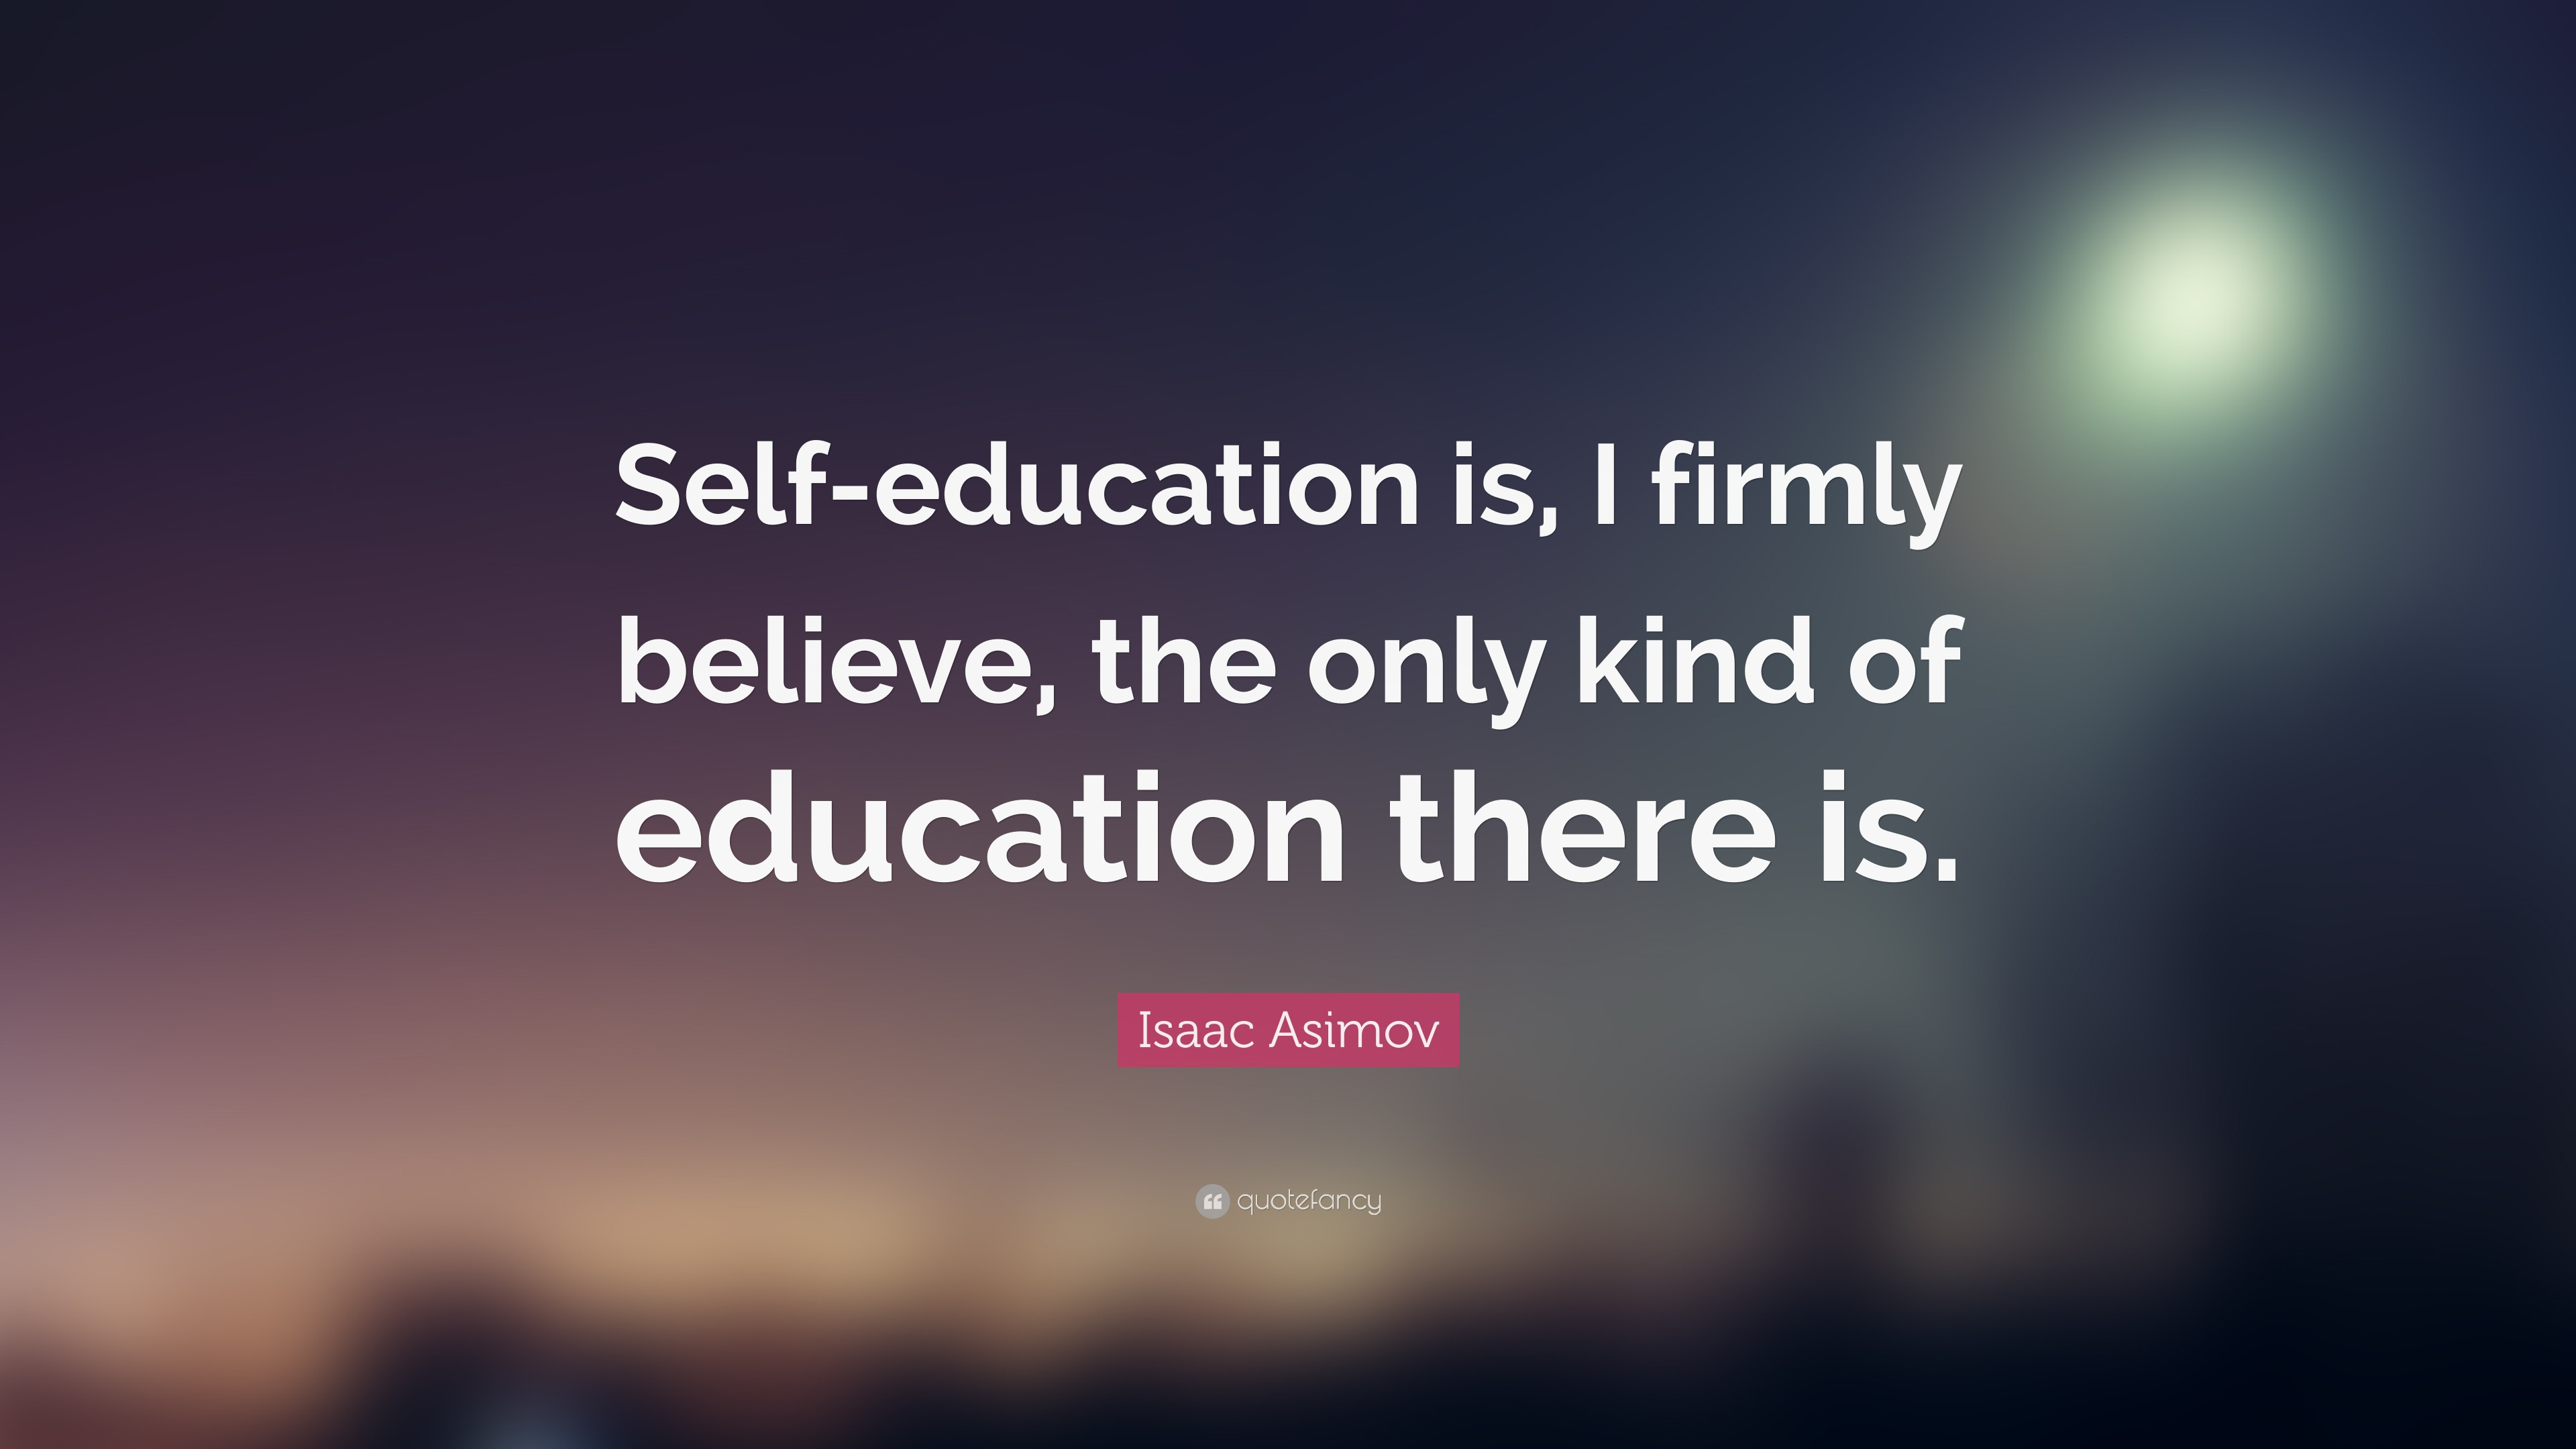 Self Education Quote
 Isaac Asimov Quote “Self education is I firmly believe